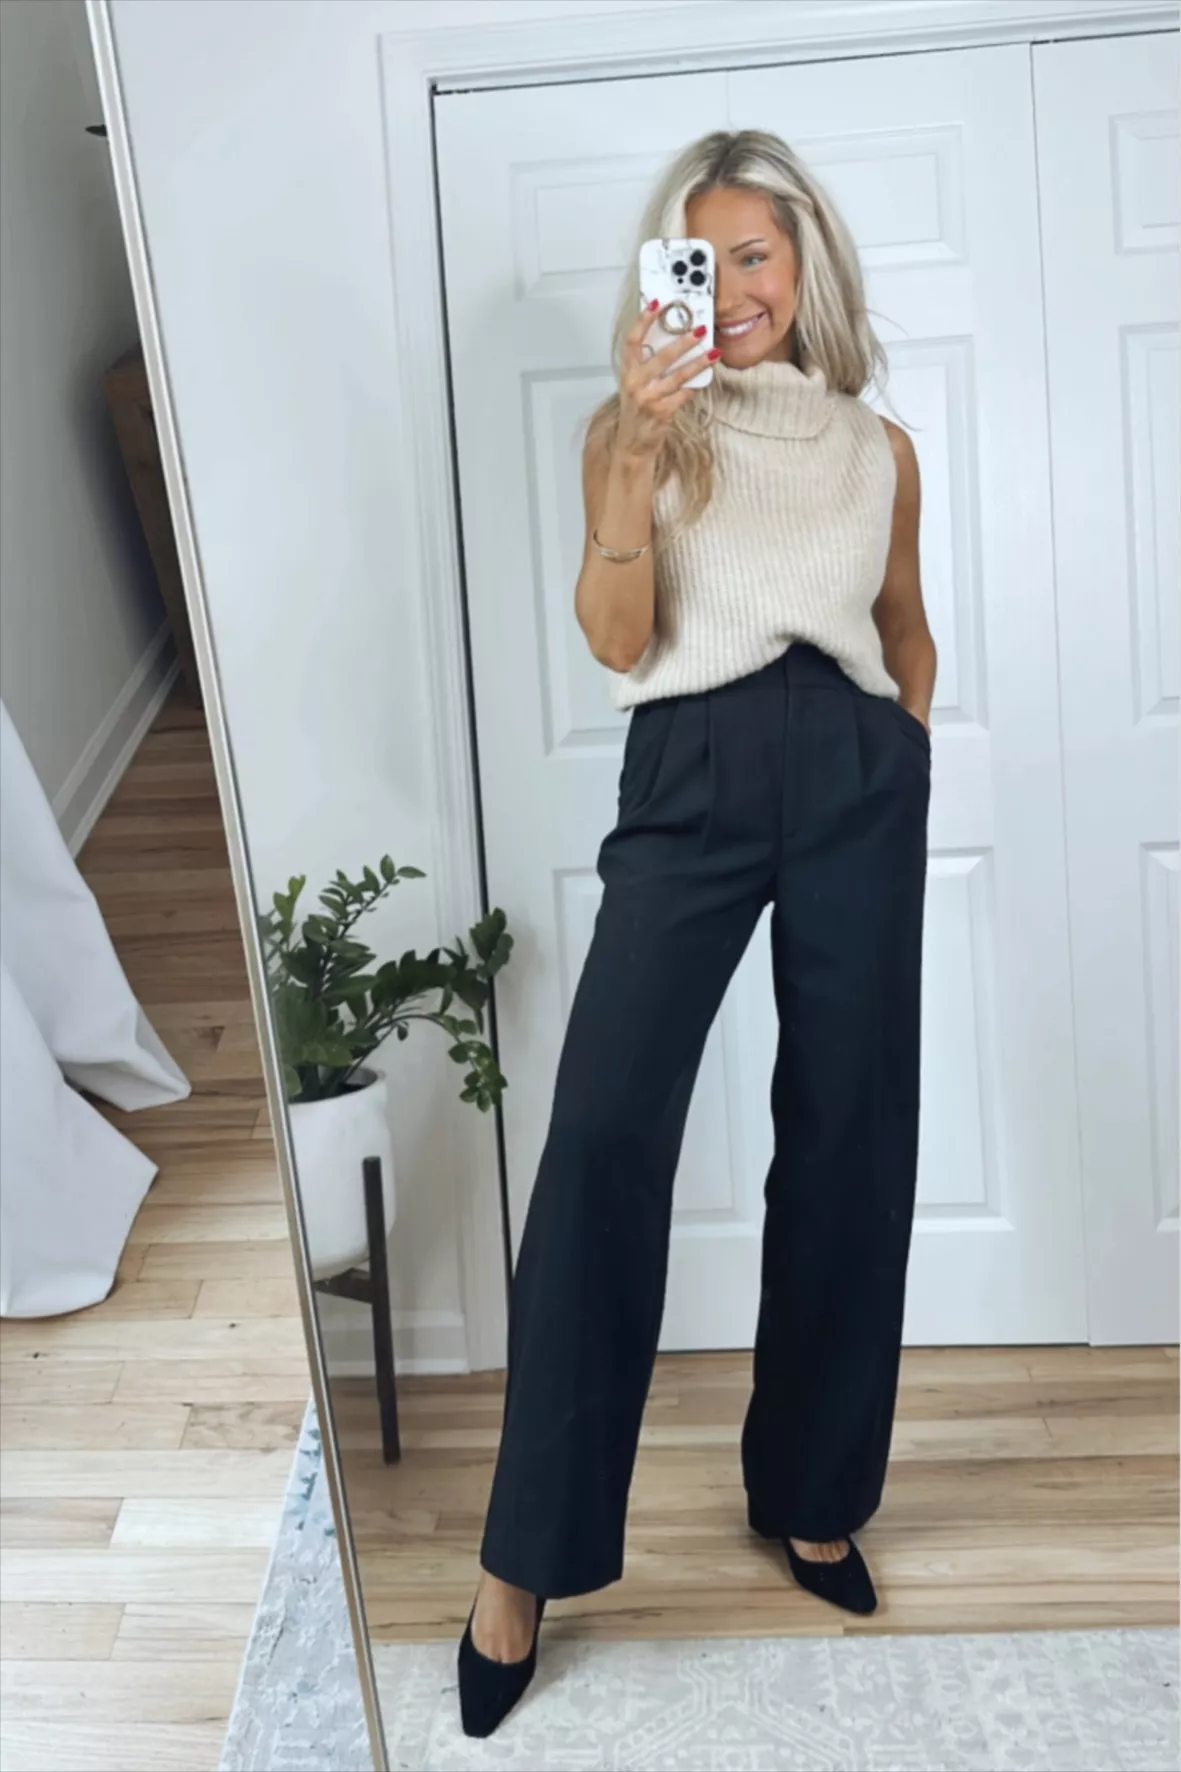 Sleeveless Turtleneck with Wide Leg Pants Outfits (2 ideas